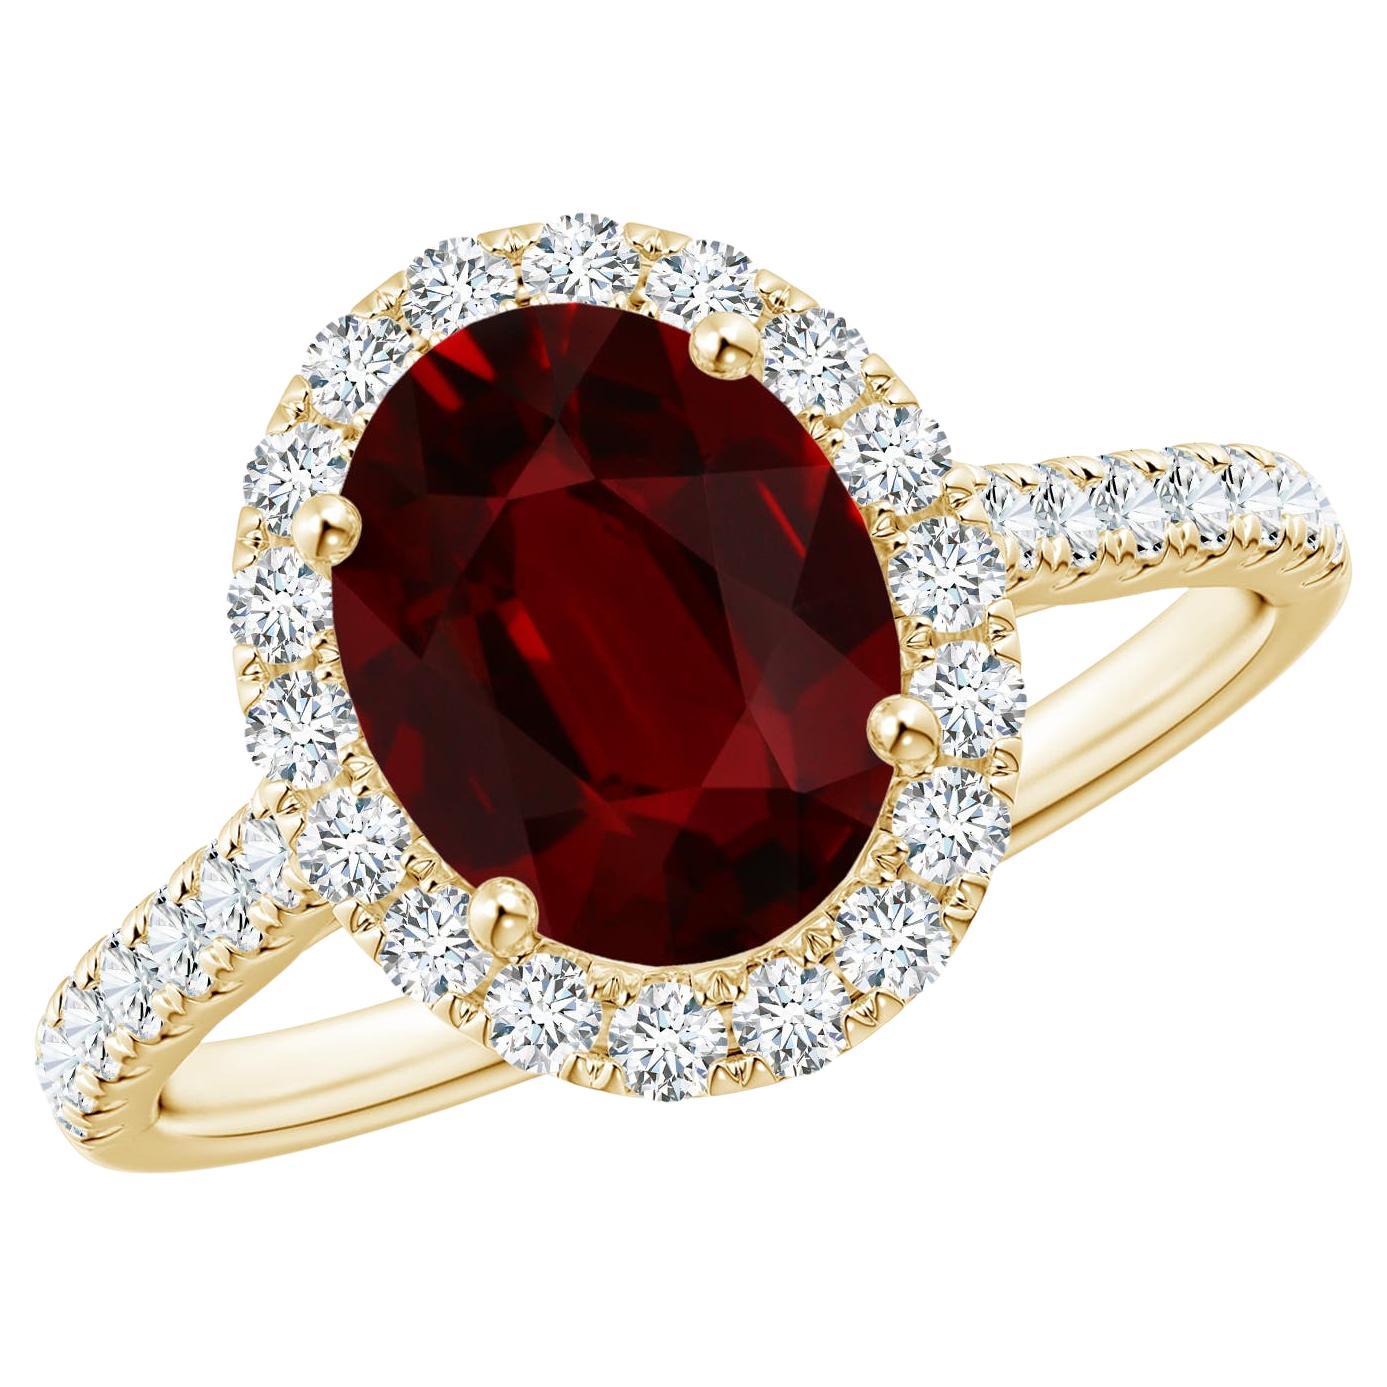 For Sale:  Angara GIA Certified Natural Ruby Halo Ring in Yellow Gold with Diamonds